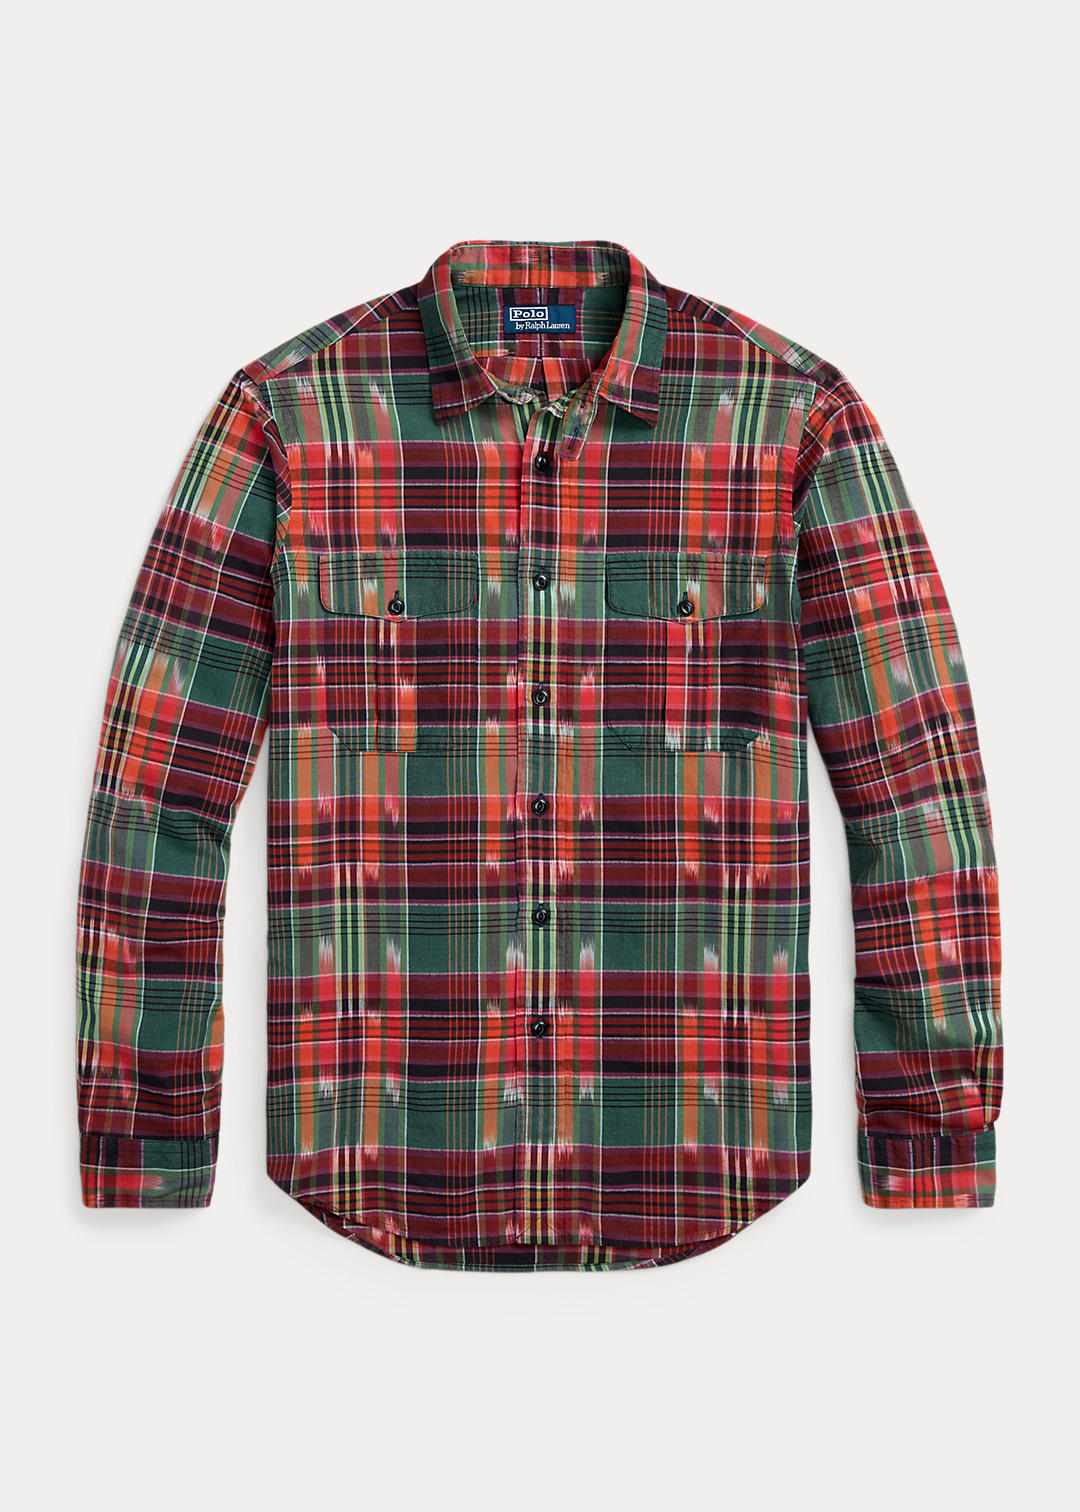 Blue Red and Ecru Indian Madras Button Down Shirt